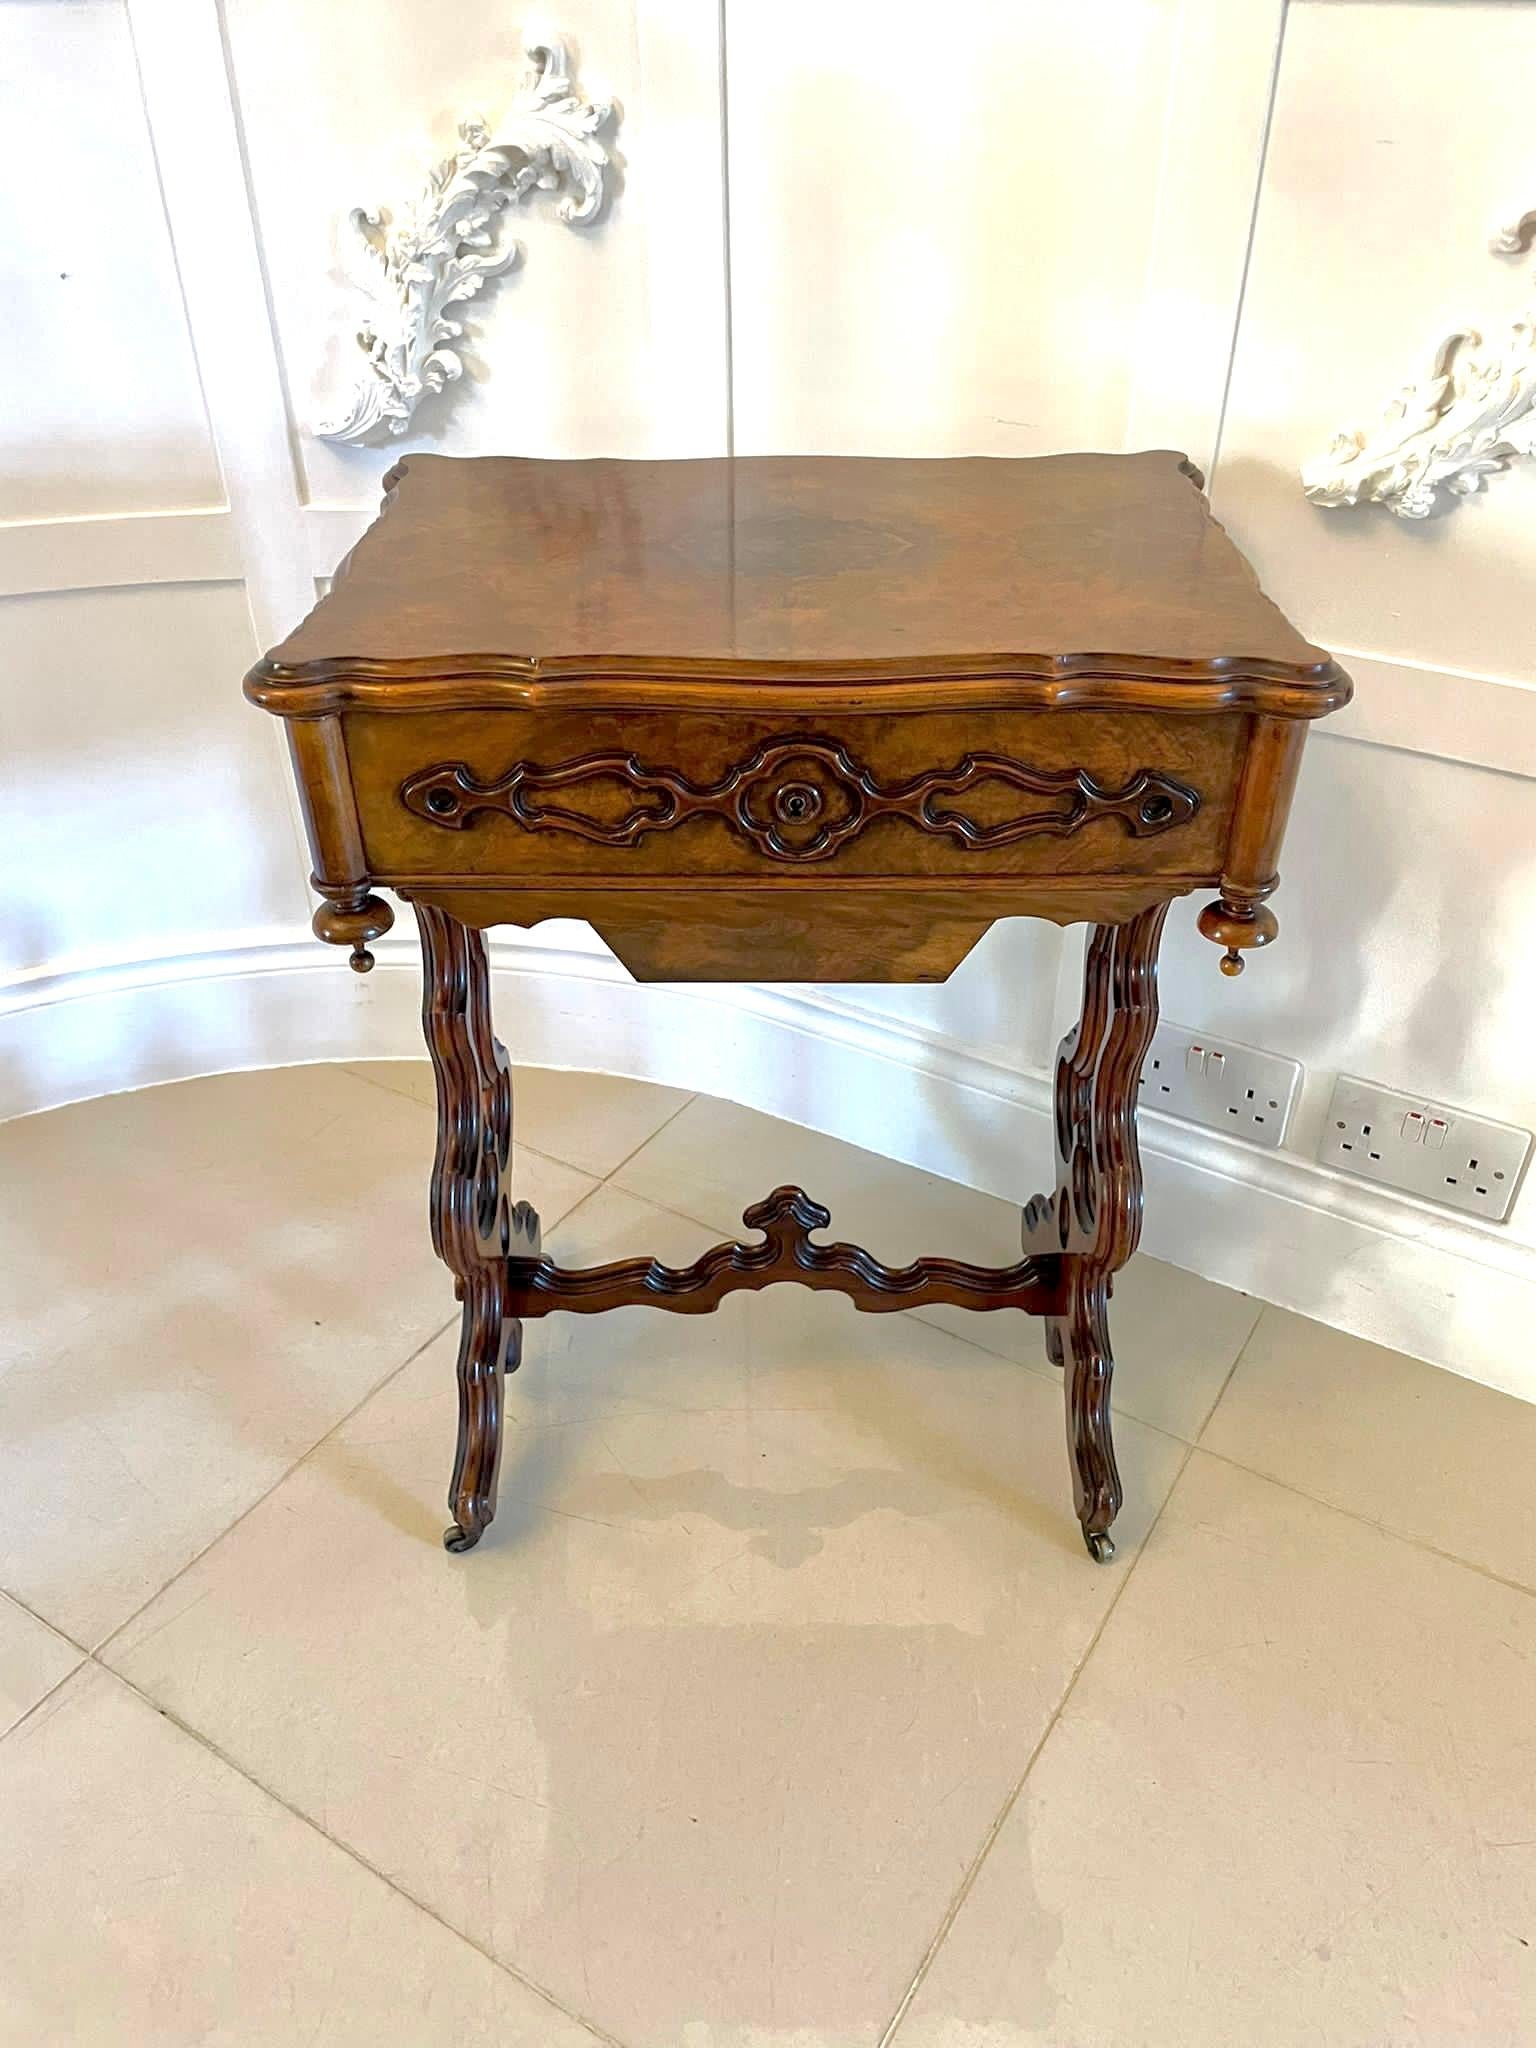 Superb quality antique Victorian burr walnut sewing table having a superb quality burr walnut shaped lift up top opening to reveal a fitted interior, a storage compartment and a fitted mirror 
Quality carved walnut sides, sliding walnut storage